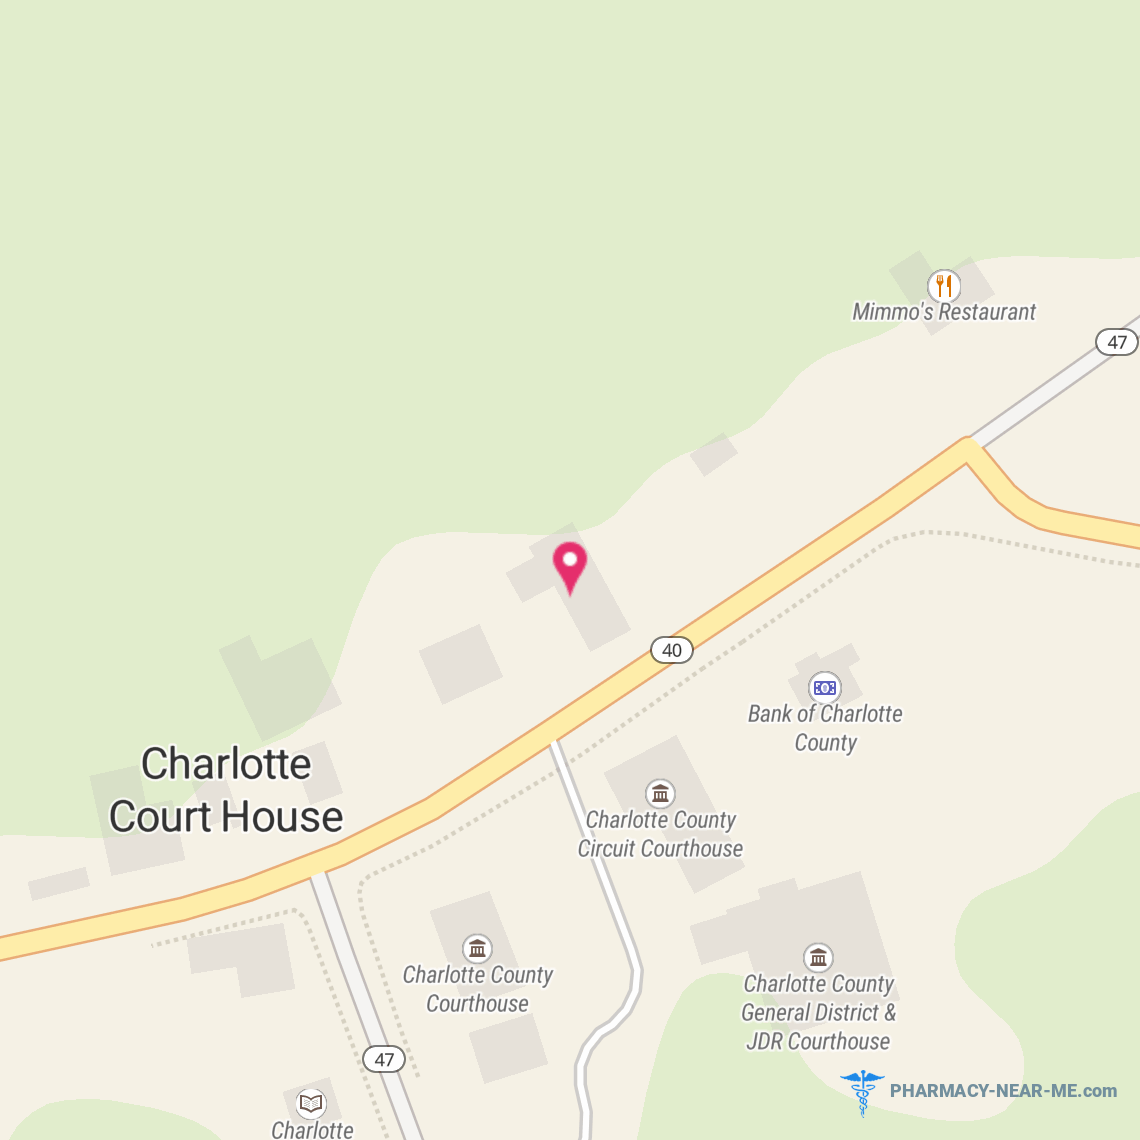 CHARLOTTE DRUG COMPANY - Pharmacy Hours, Phone, Reviews & Information: 120 David Bruce Avenue, Charlotte Court House, Virginia 23923, United States